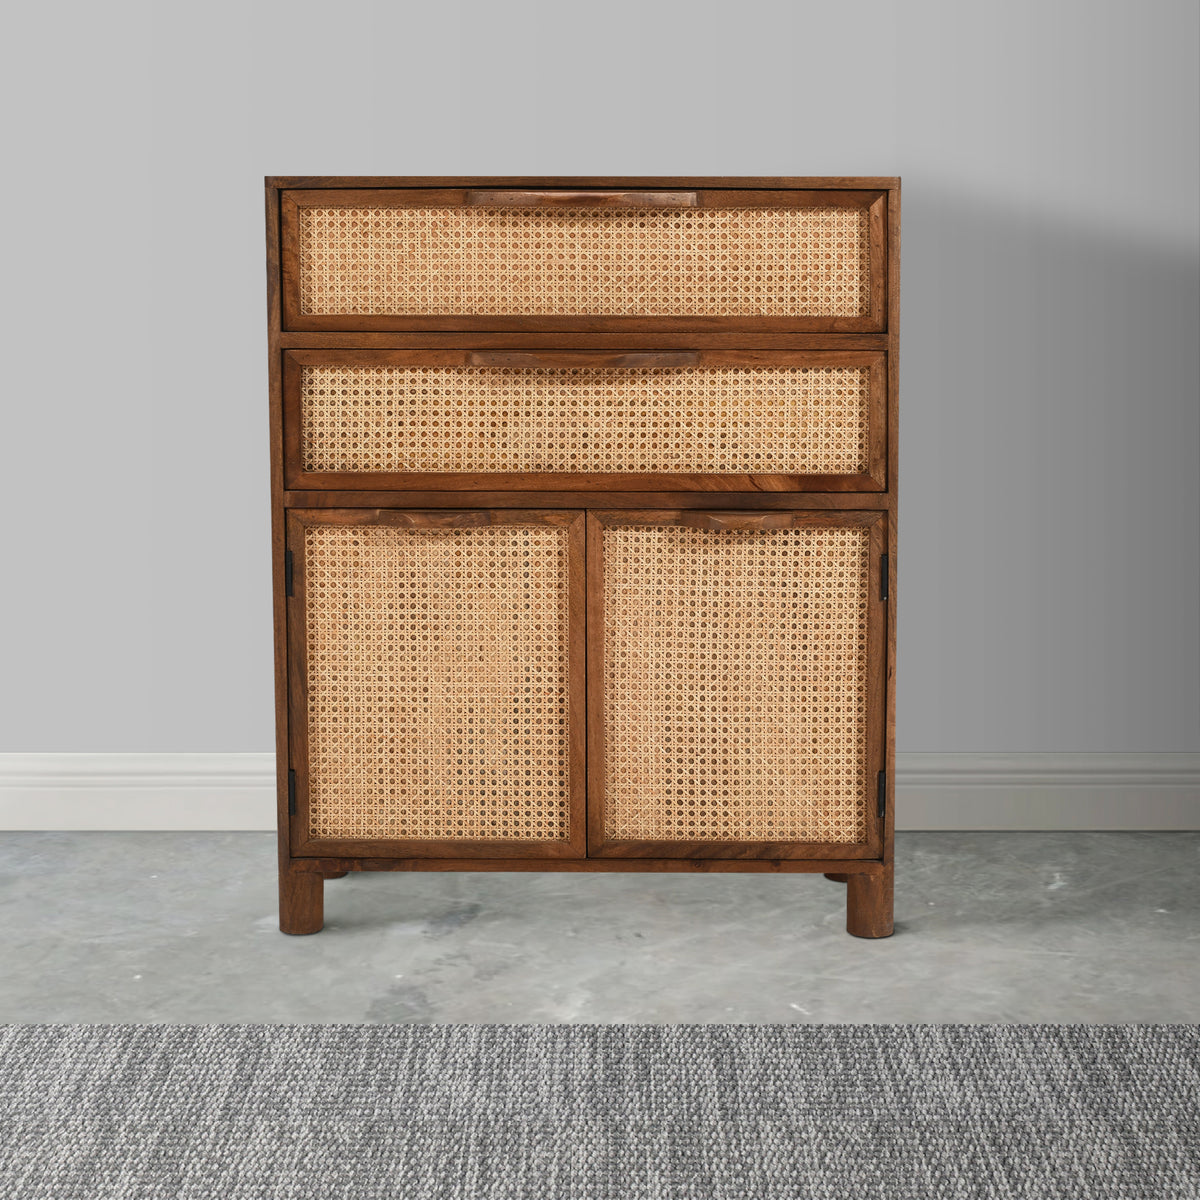 Mia 35 Inch Tall Dresser Chest, Woven Rattan Cabinet Doors and Drawer Fronts, Handcrafted Natural Mango Wood - UPT-301716